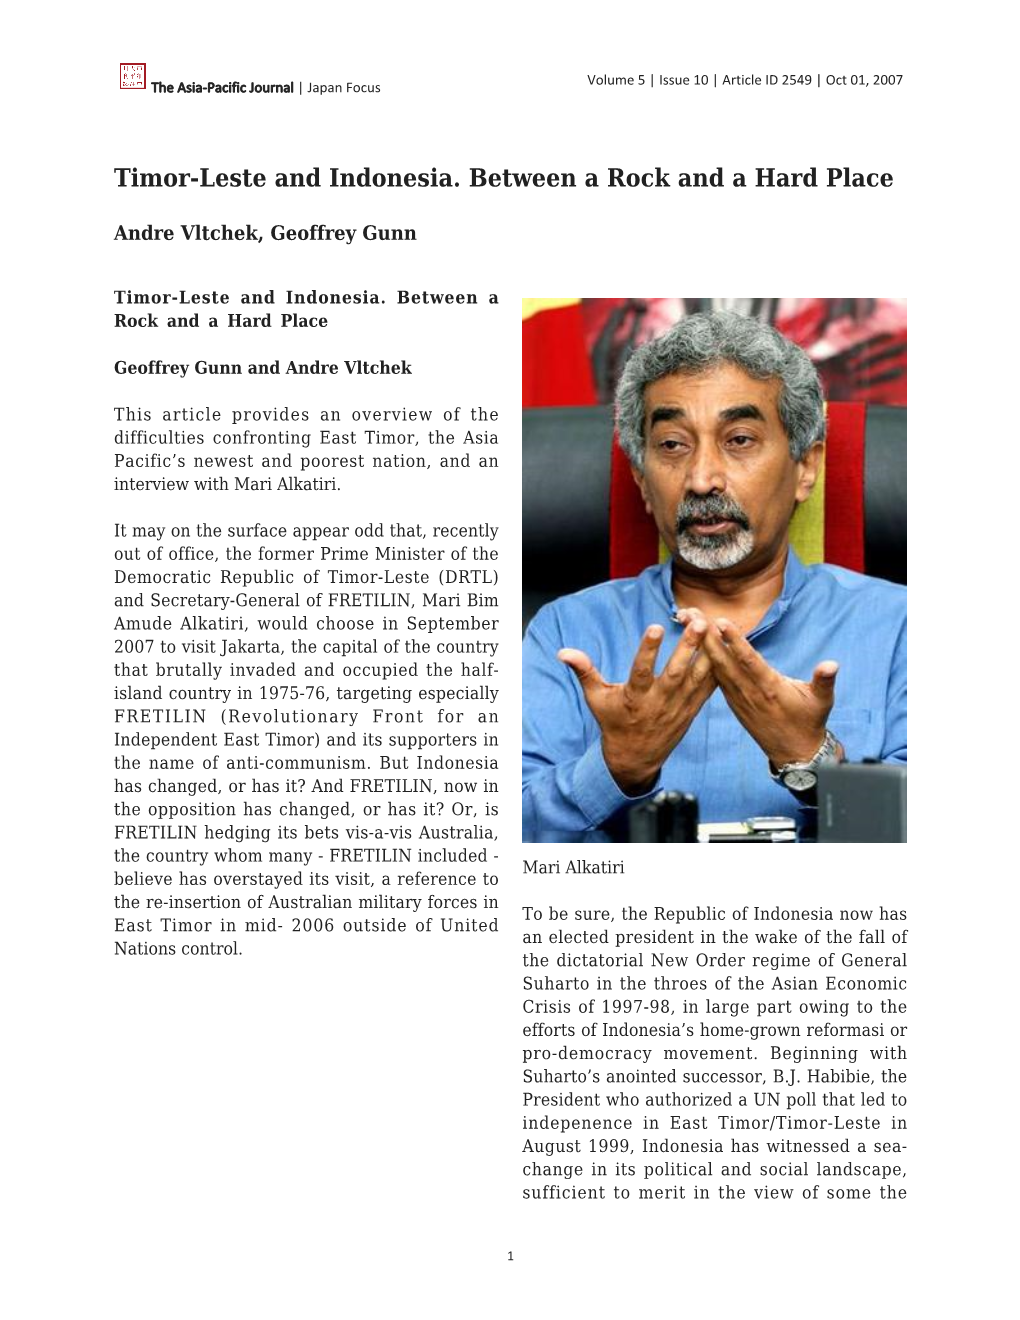 Timor-Leste and Indonesia. Between a Rock and a Hard Place